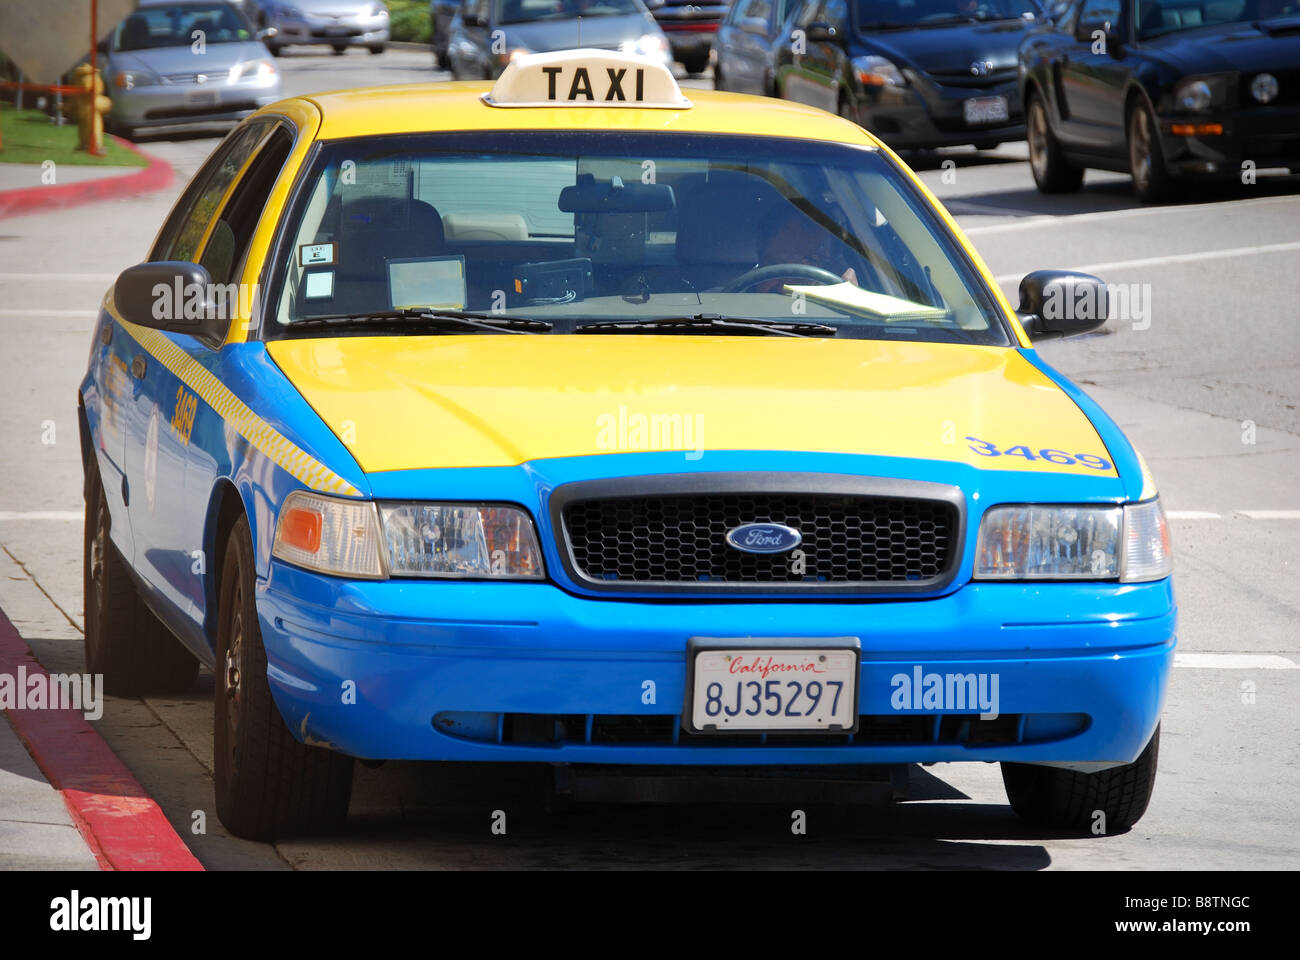 Los Angeles taxi, Wilshire Boulevard, Los Angeles, California, United States of America Stock Photo